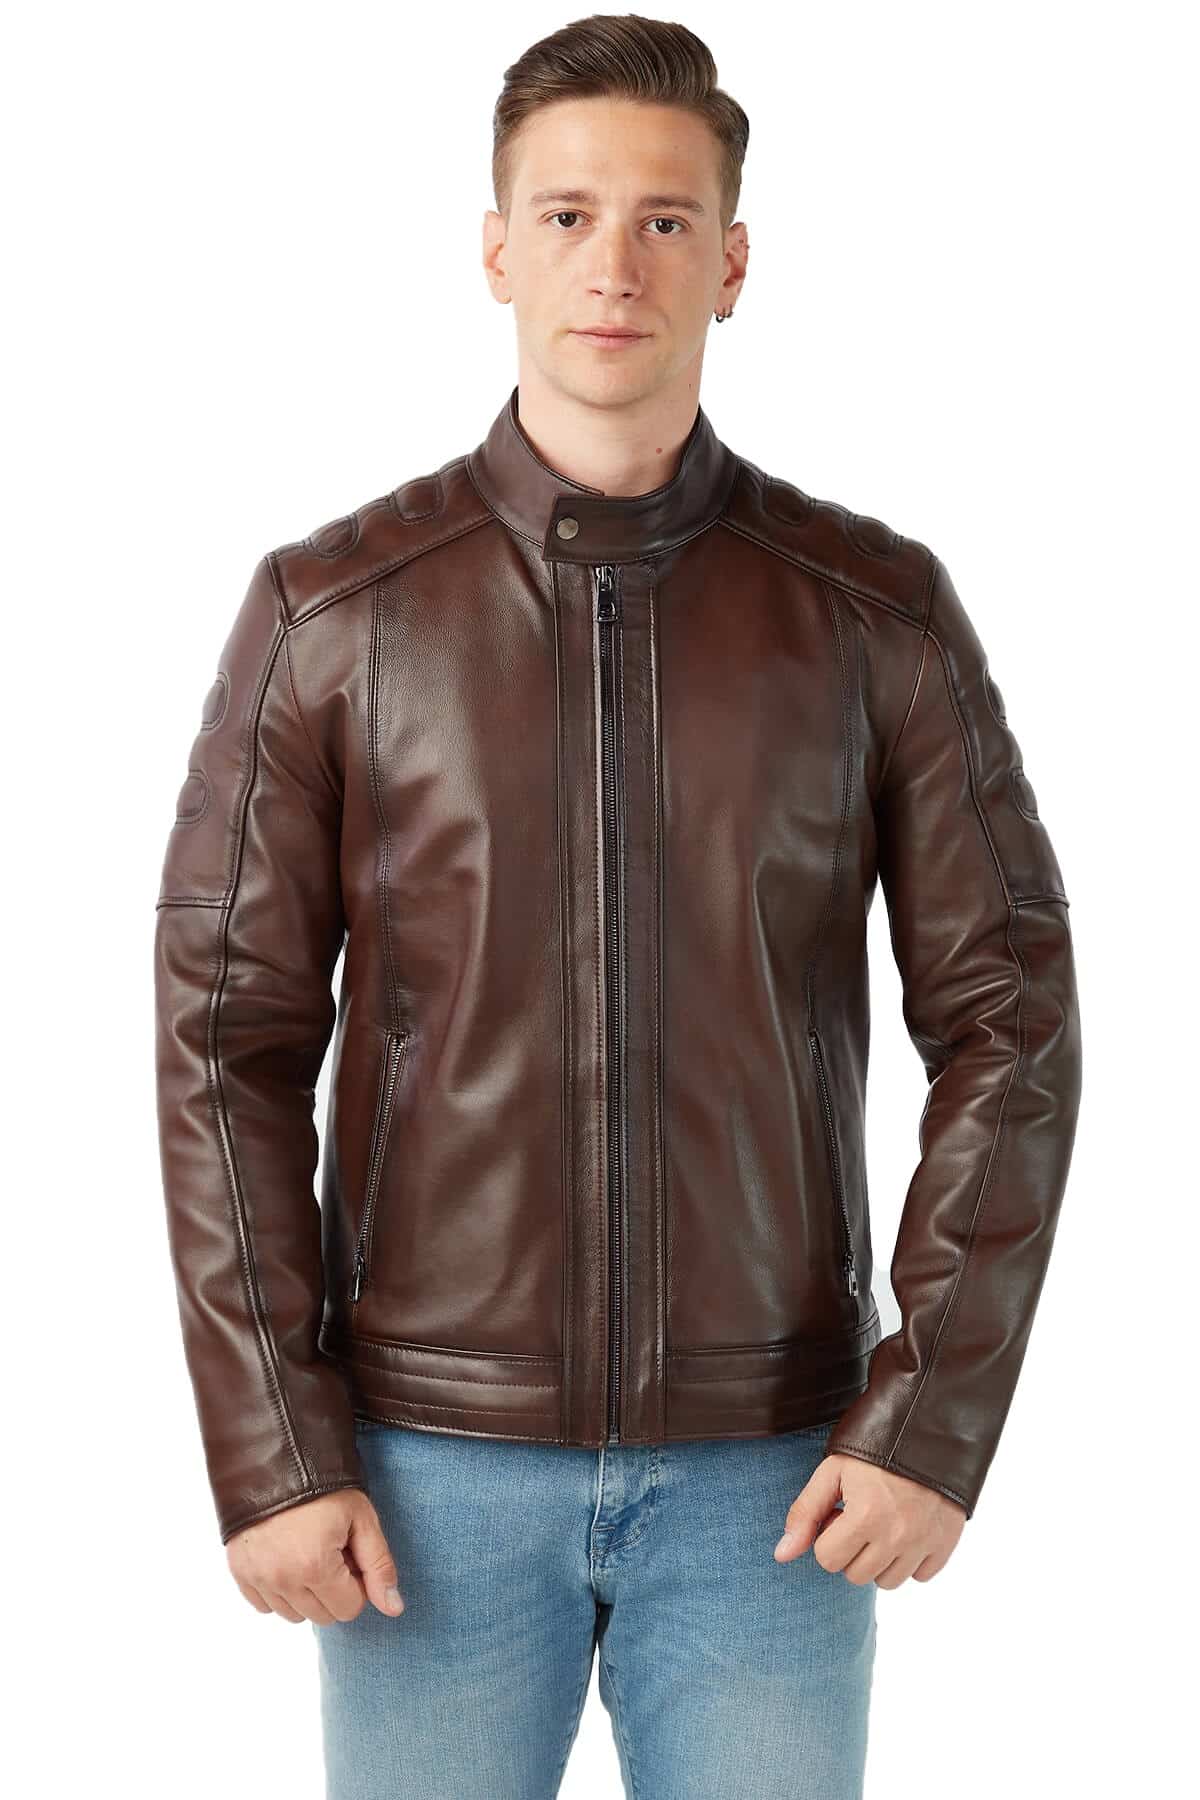 Men's 100 % Real Chestnut Leather Dyeing Jacket